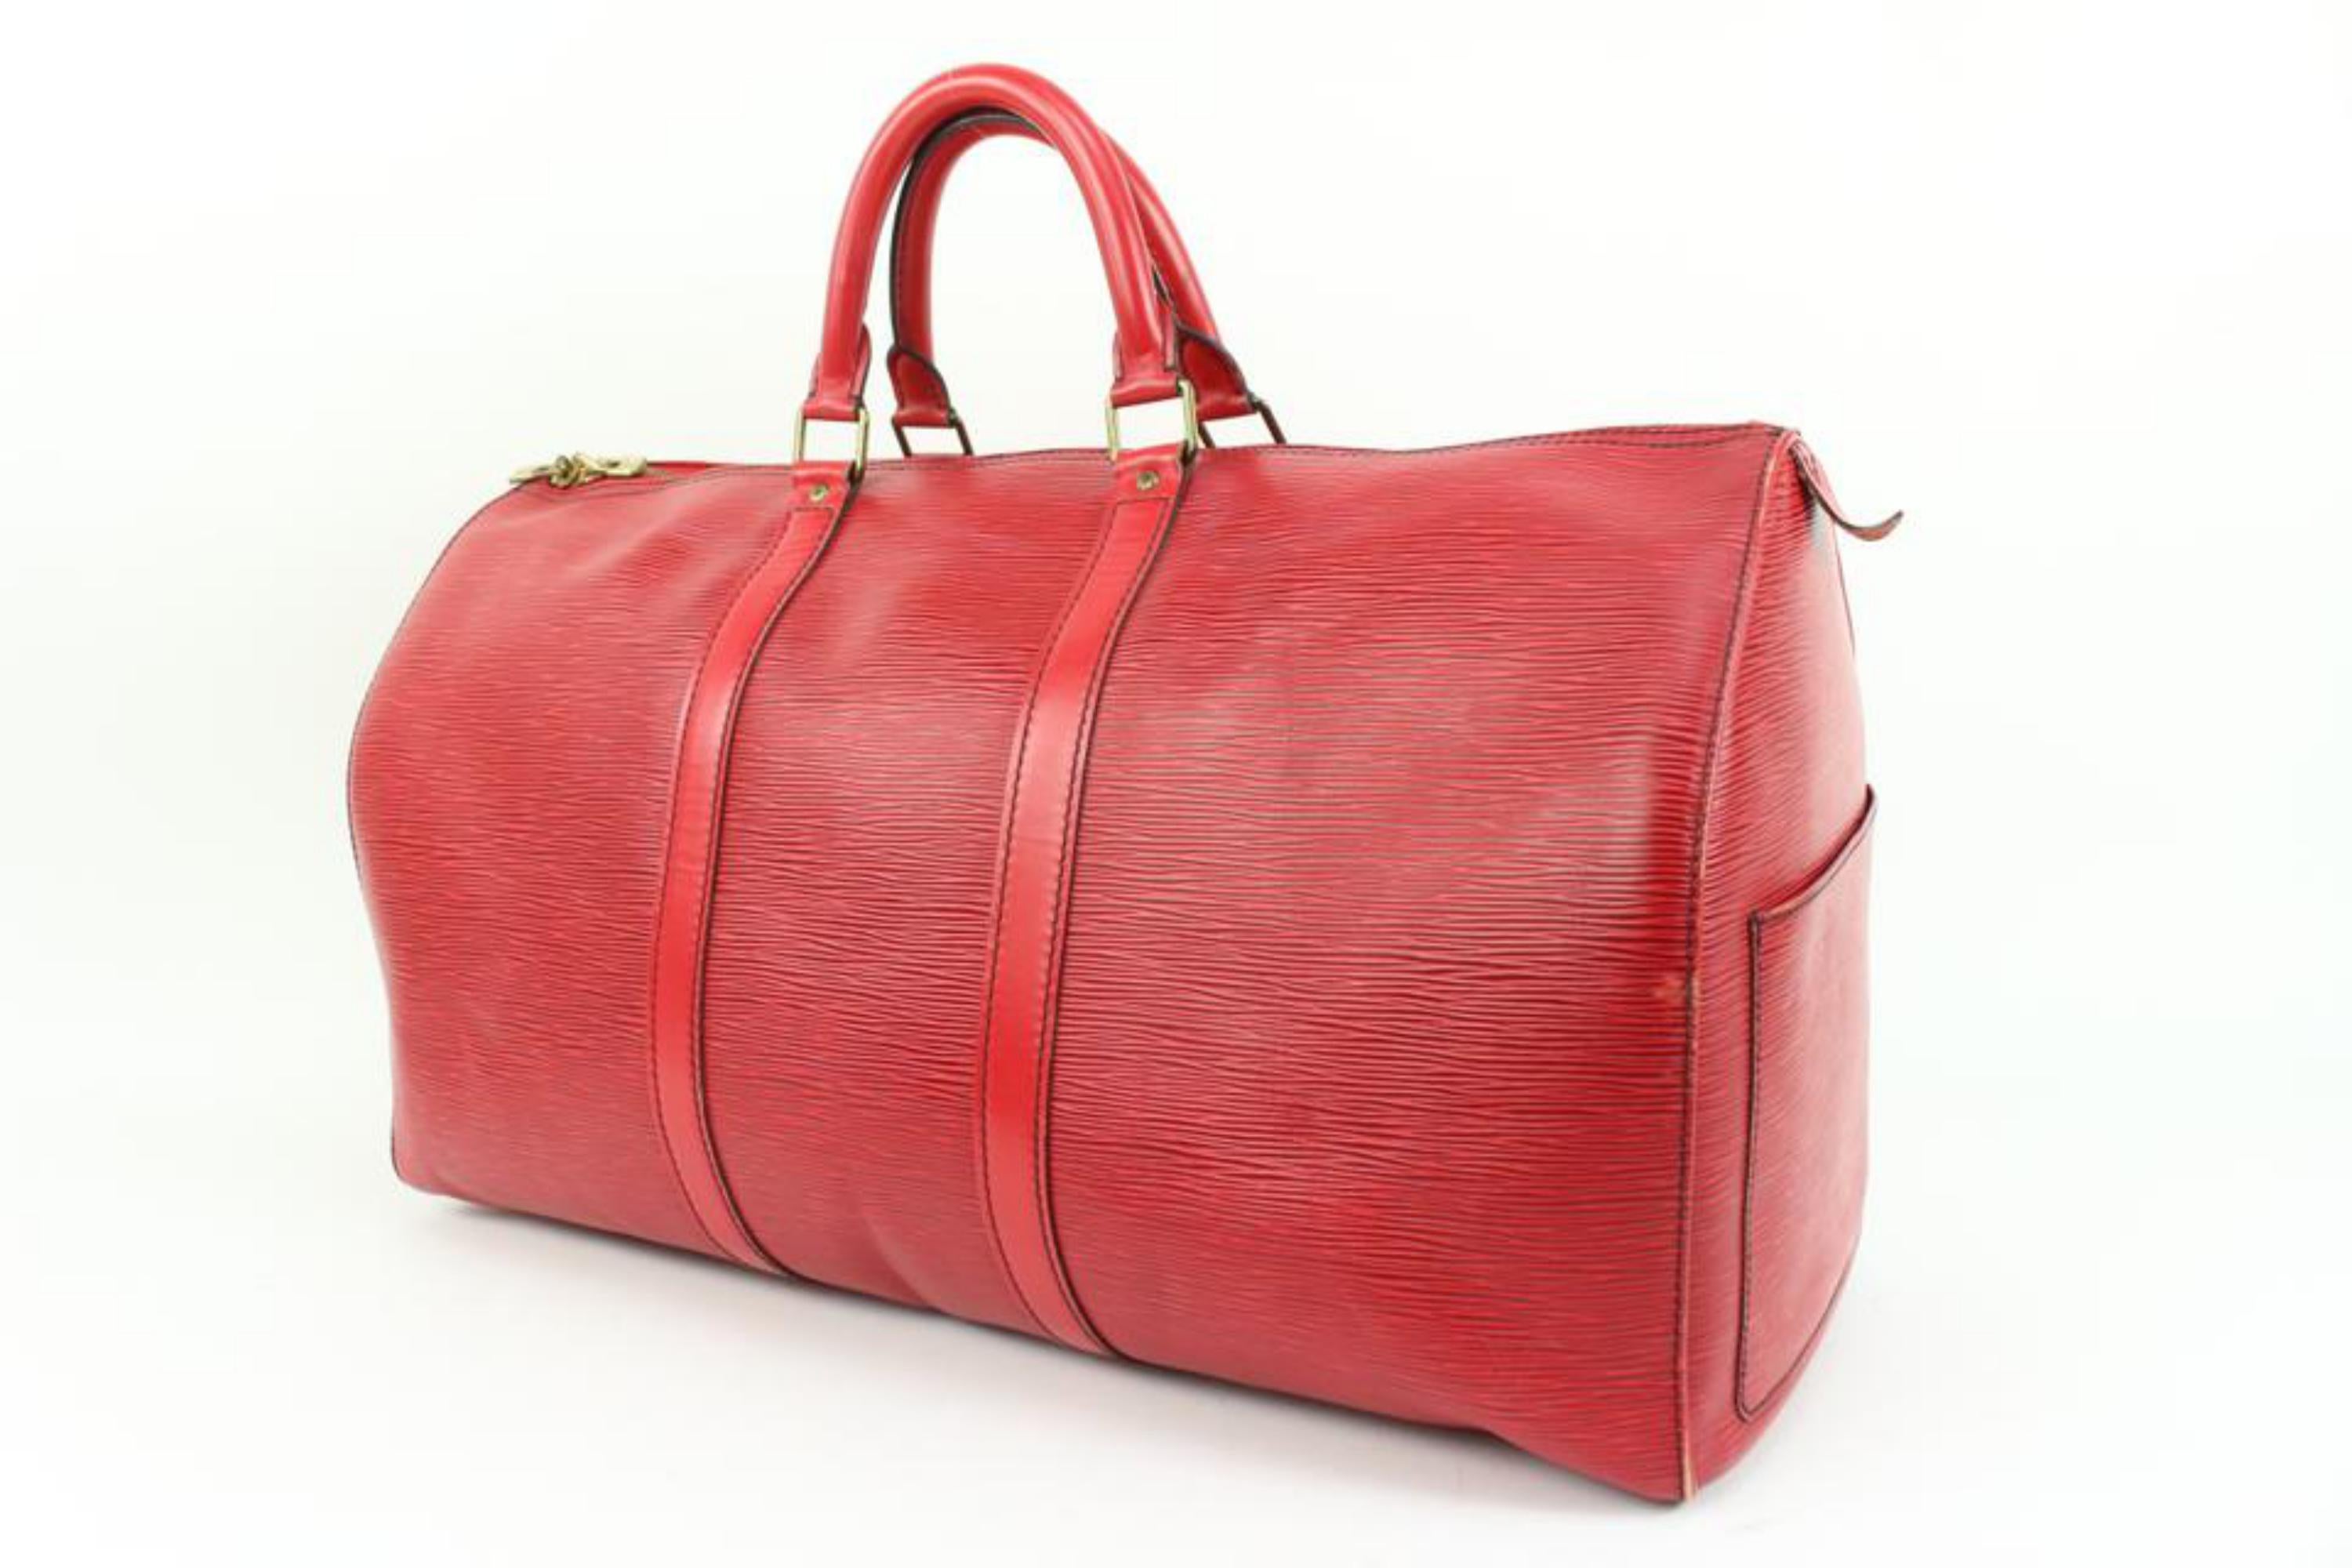 Louis Vuitton Red Epi Leather Keepall 50 Duffle Bag 89lk328s
Date Code/Serial Number: VI8907
Made In: France
Measurements: Length:  20